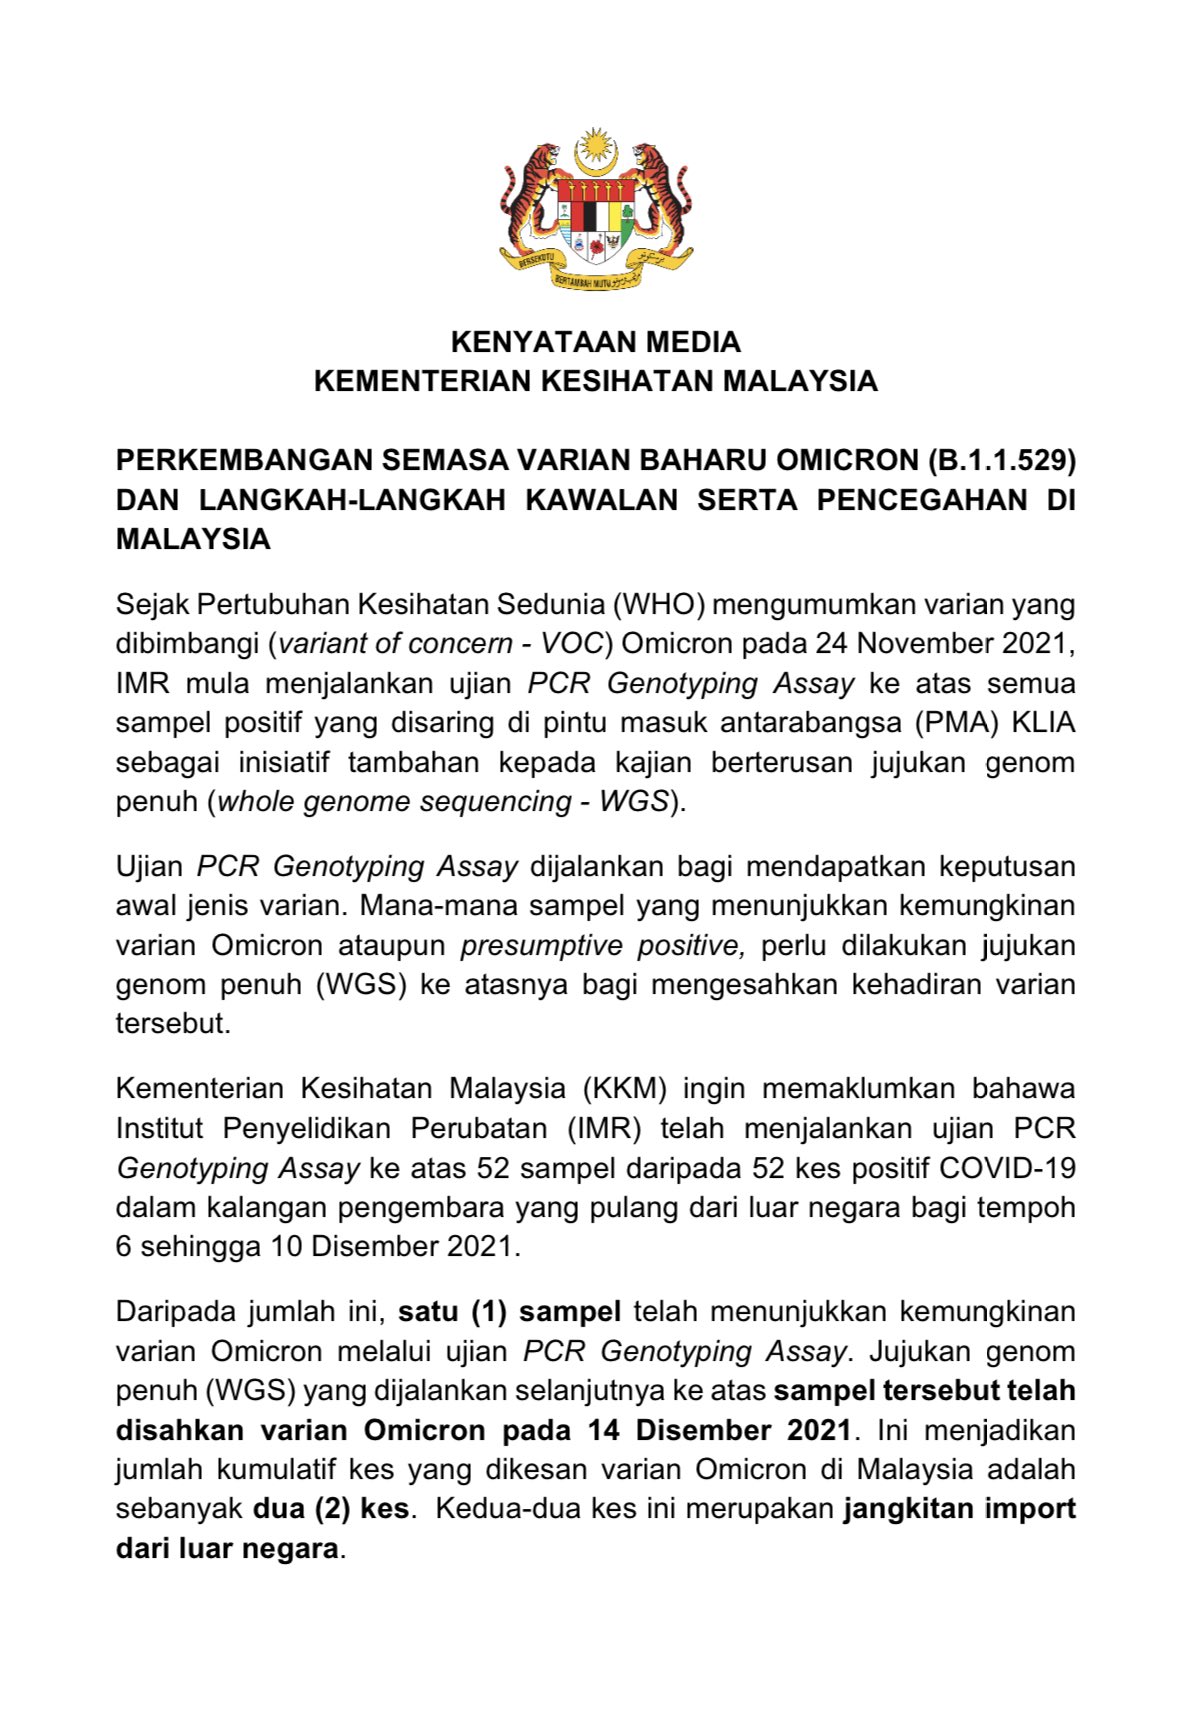 Second Omicron case in Malaysia - statement